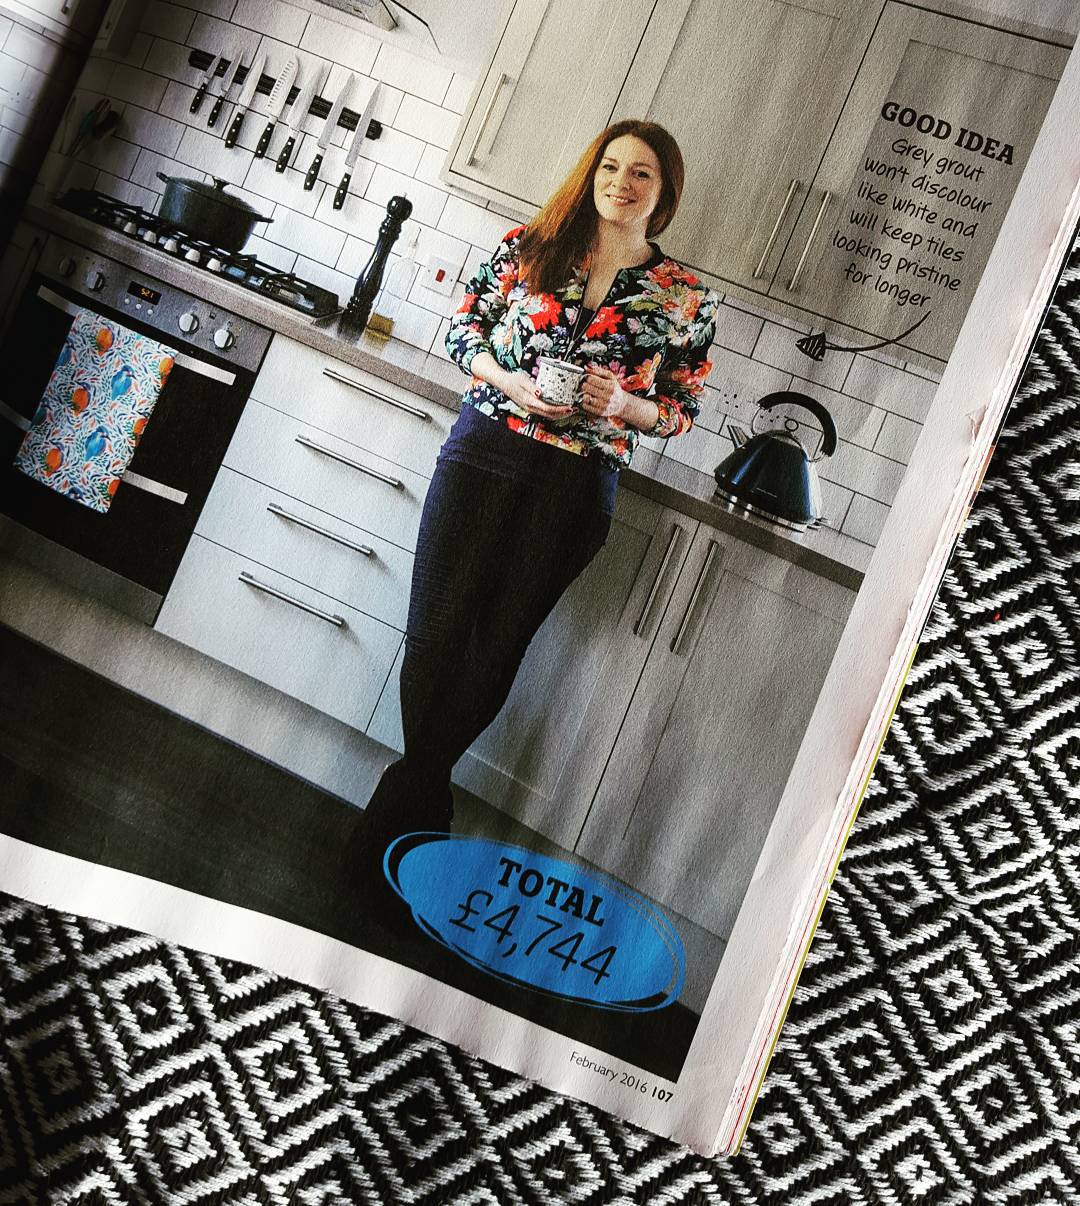 Look who's in the latest issue of HomeStyle magazine!